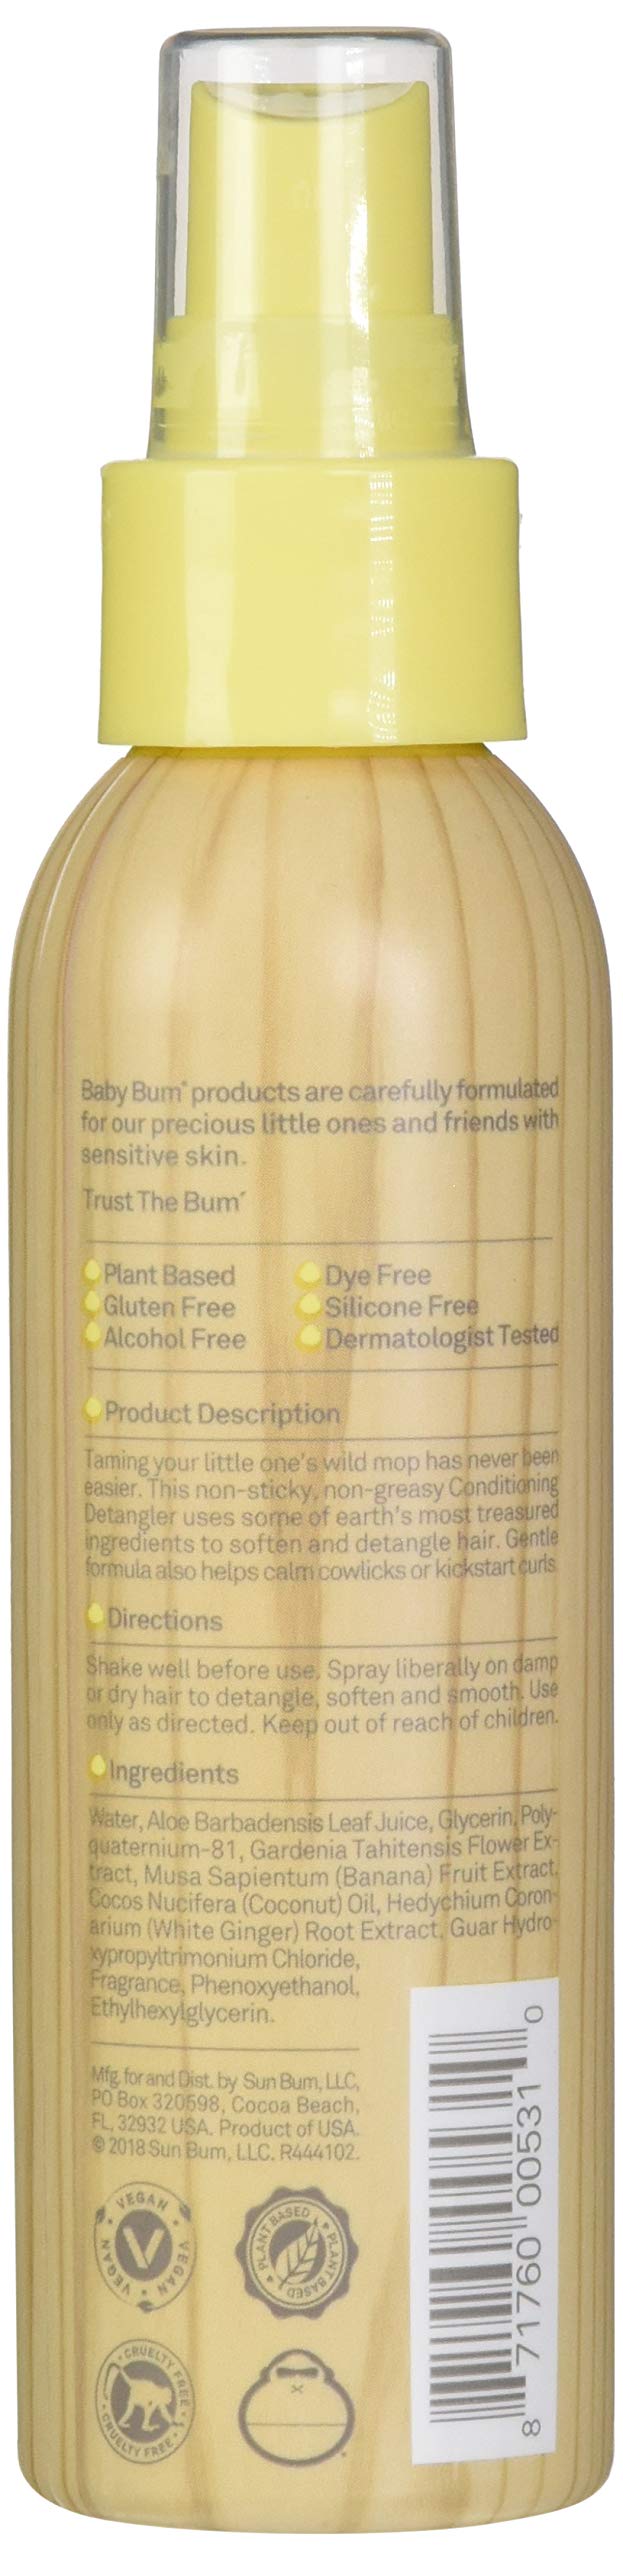 Baby Bum Baby Bum Conditioning Detangler Spray - Leave-in Conditioner â€“ Natural Fragrance - Gentle & Safe With Soothing Coconut Oil - 4 Fl Ounce, 4 Fluid Ounce (Pack Of 6)